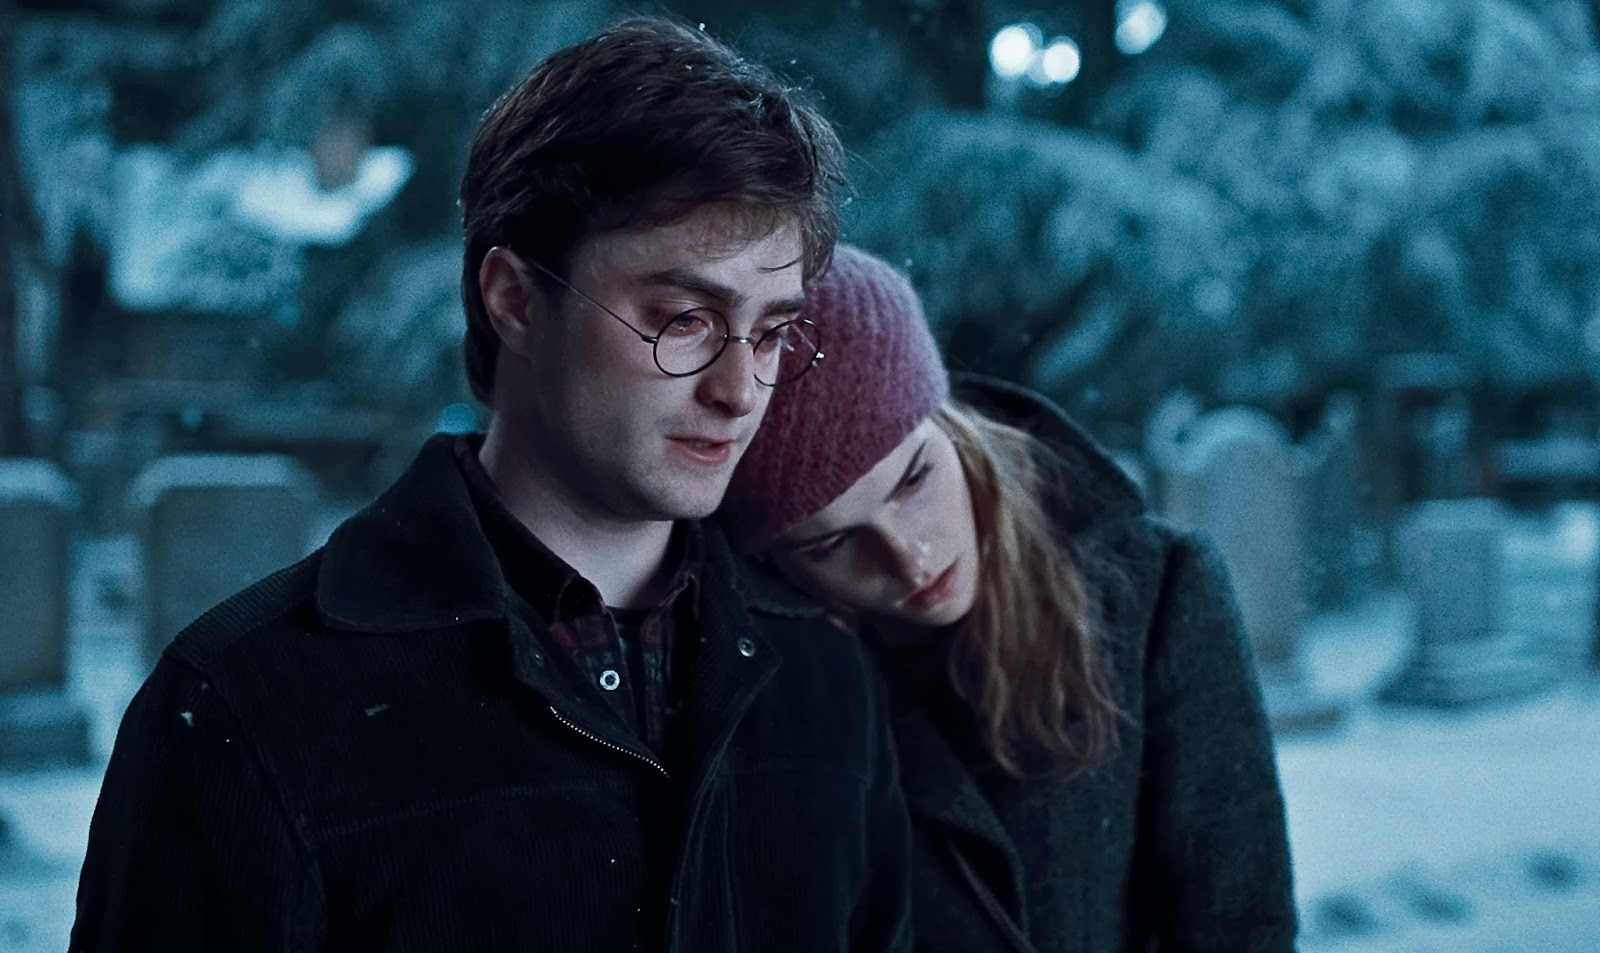 Harry-Potter-Deathly-Hallows-movie-image-11